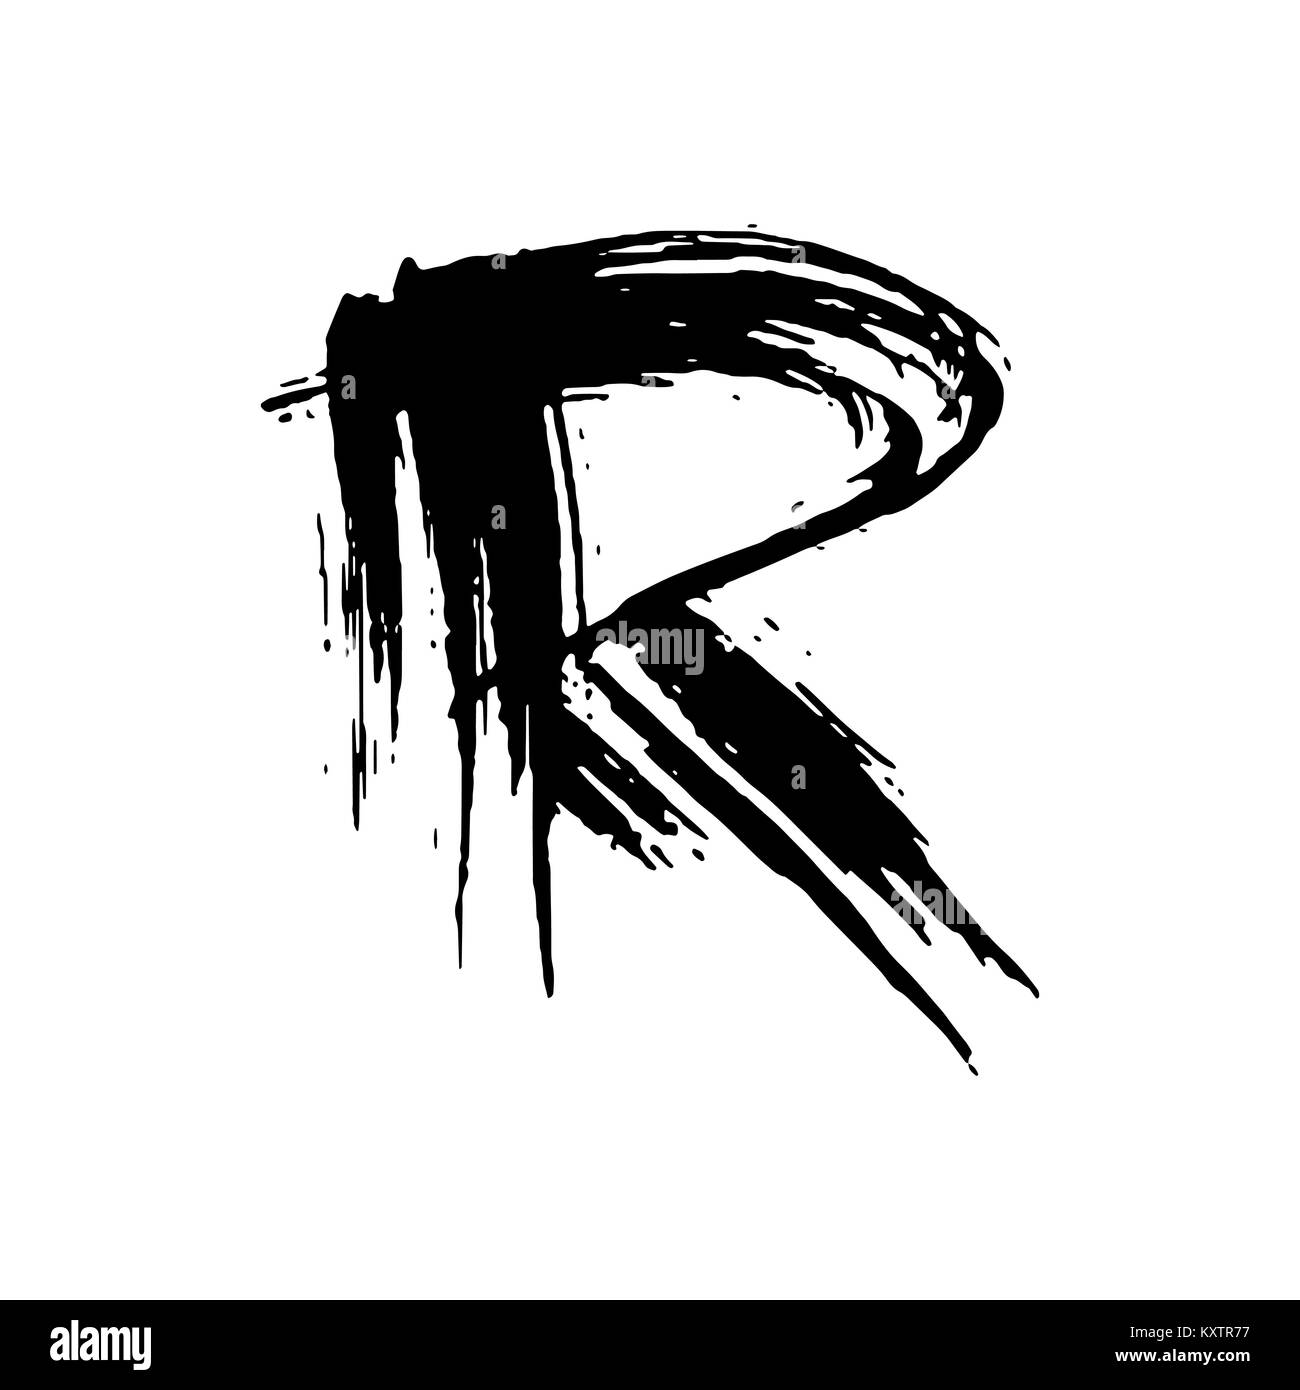 Letter r Black and White Stock Photos & Images - Alamy